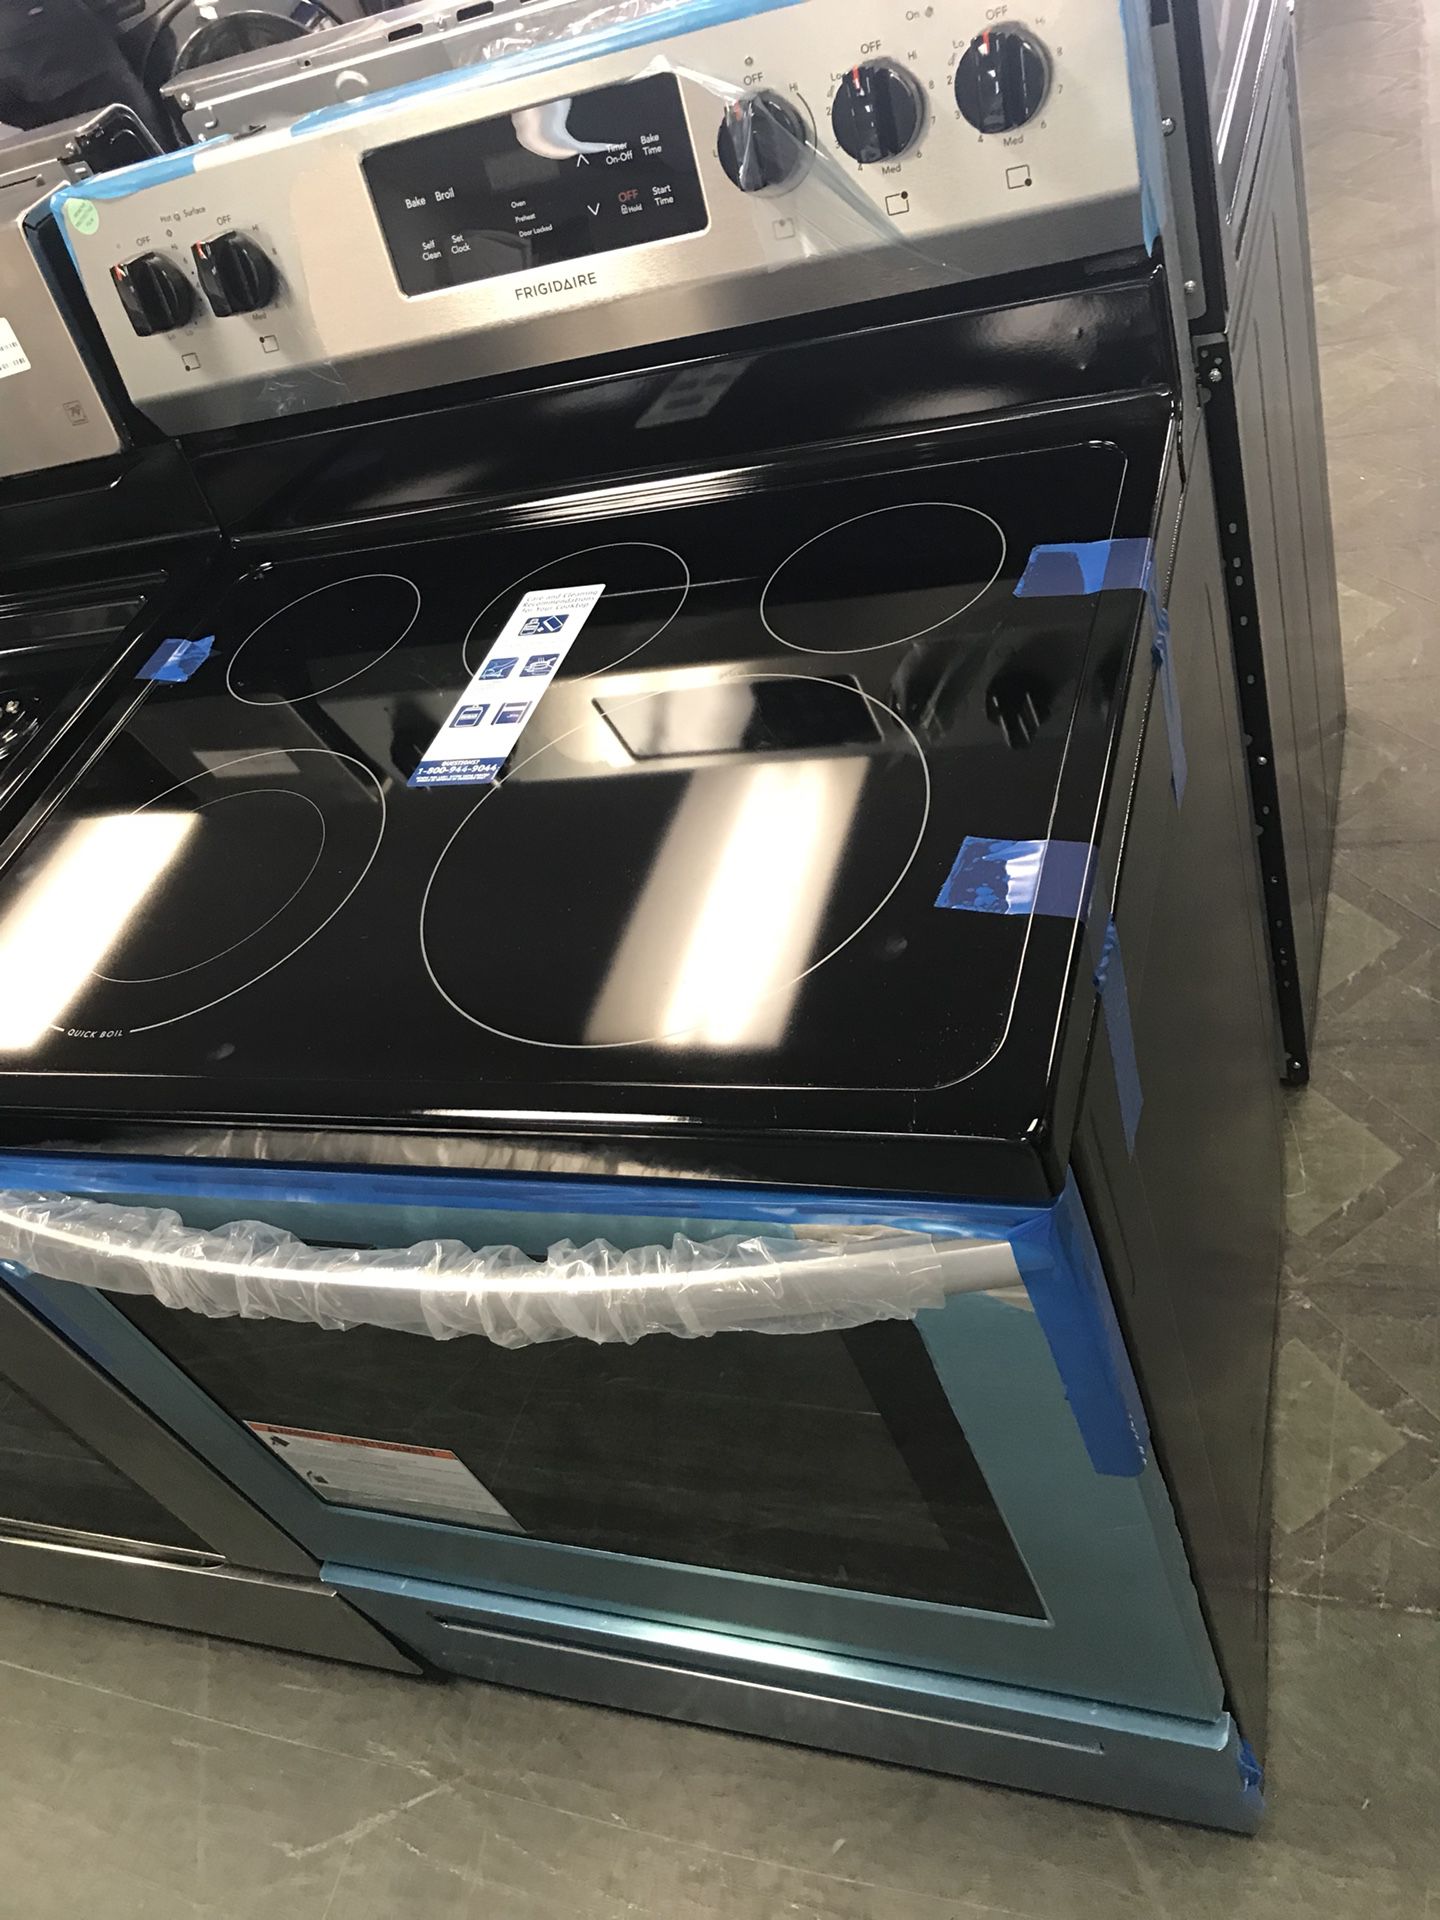 Frigidaire brand open box scratch and dent model stainless steel Electric stove.